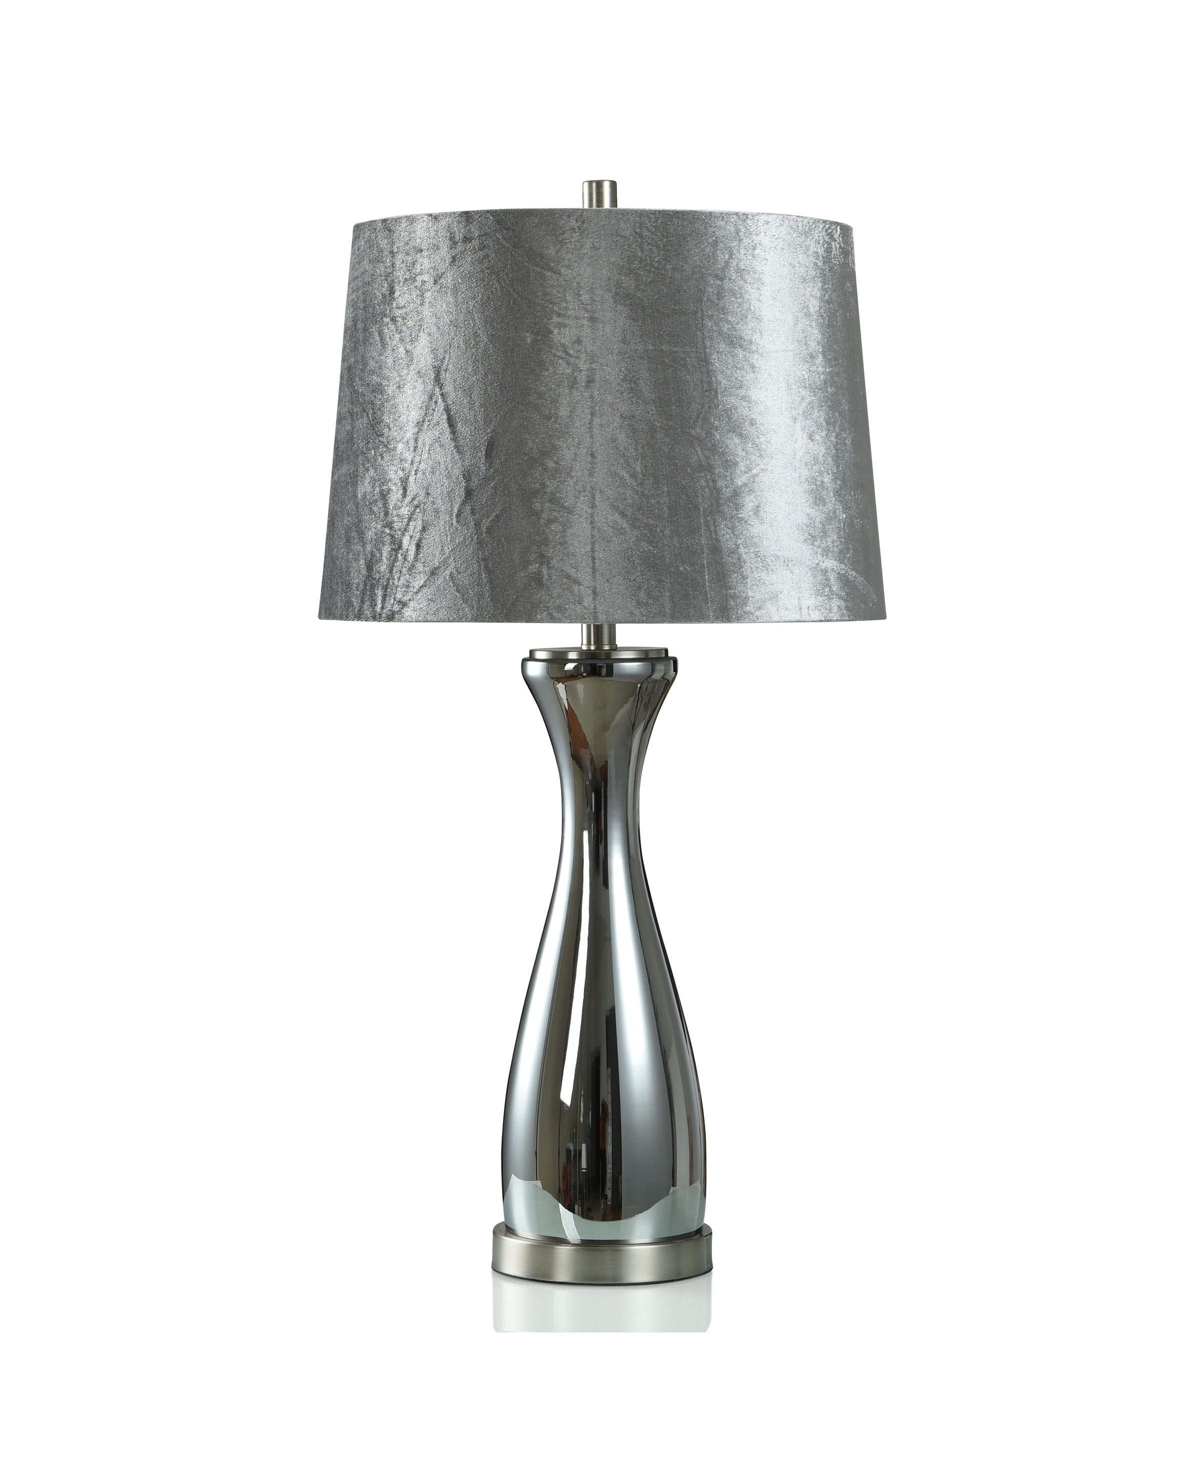 Stylecraft Home Collection 31" Subdued Elegant Table Lamp With Velvet Shade In Smokey Gray,chrome,semi-translucent